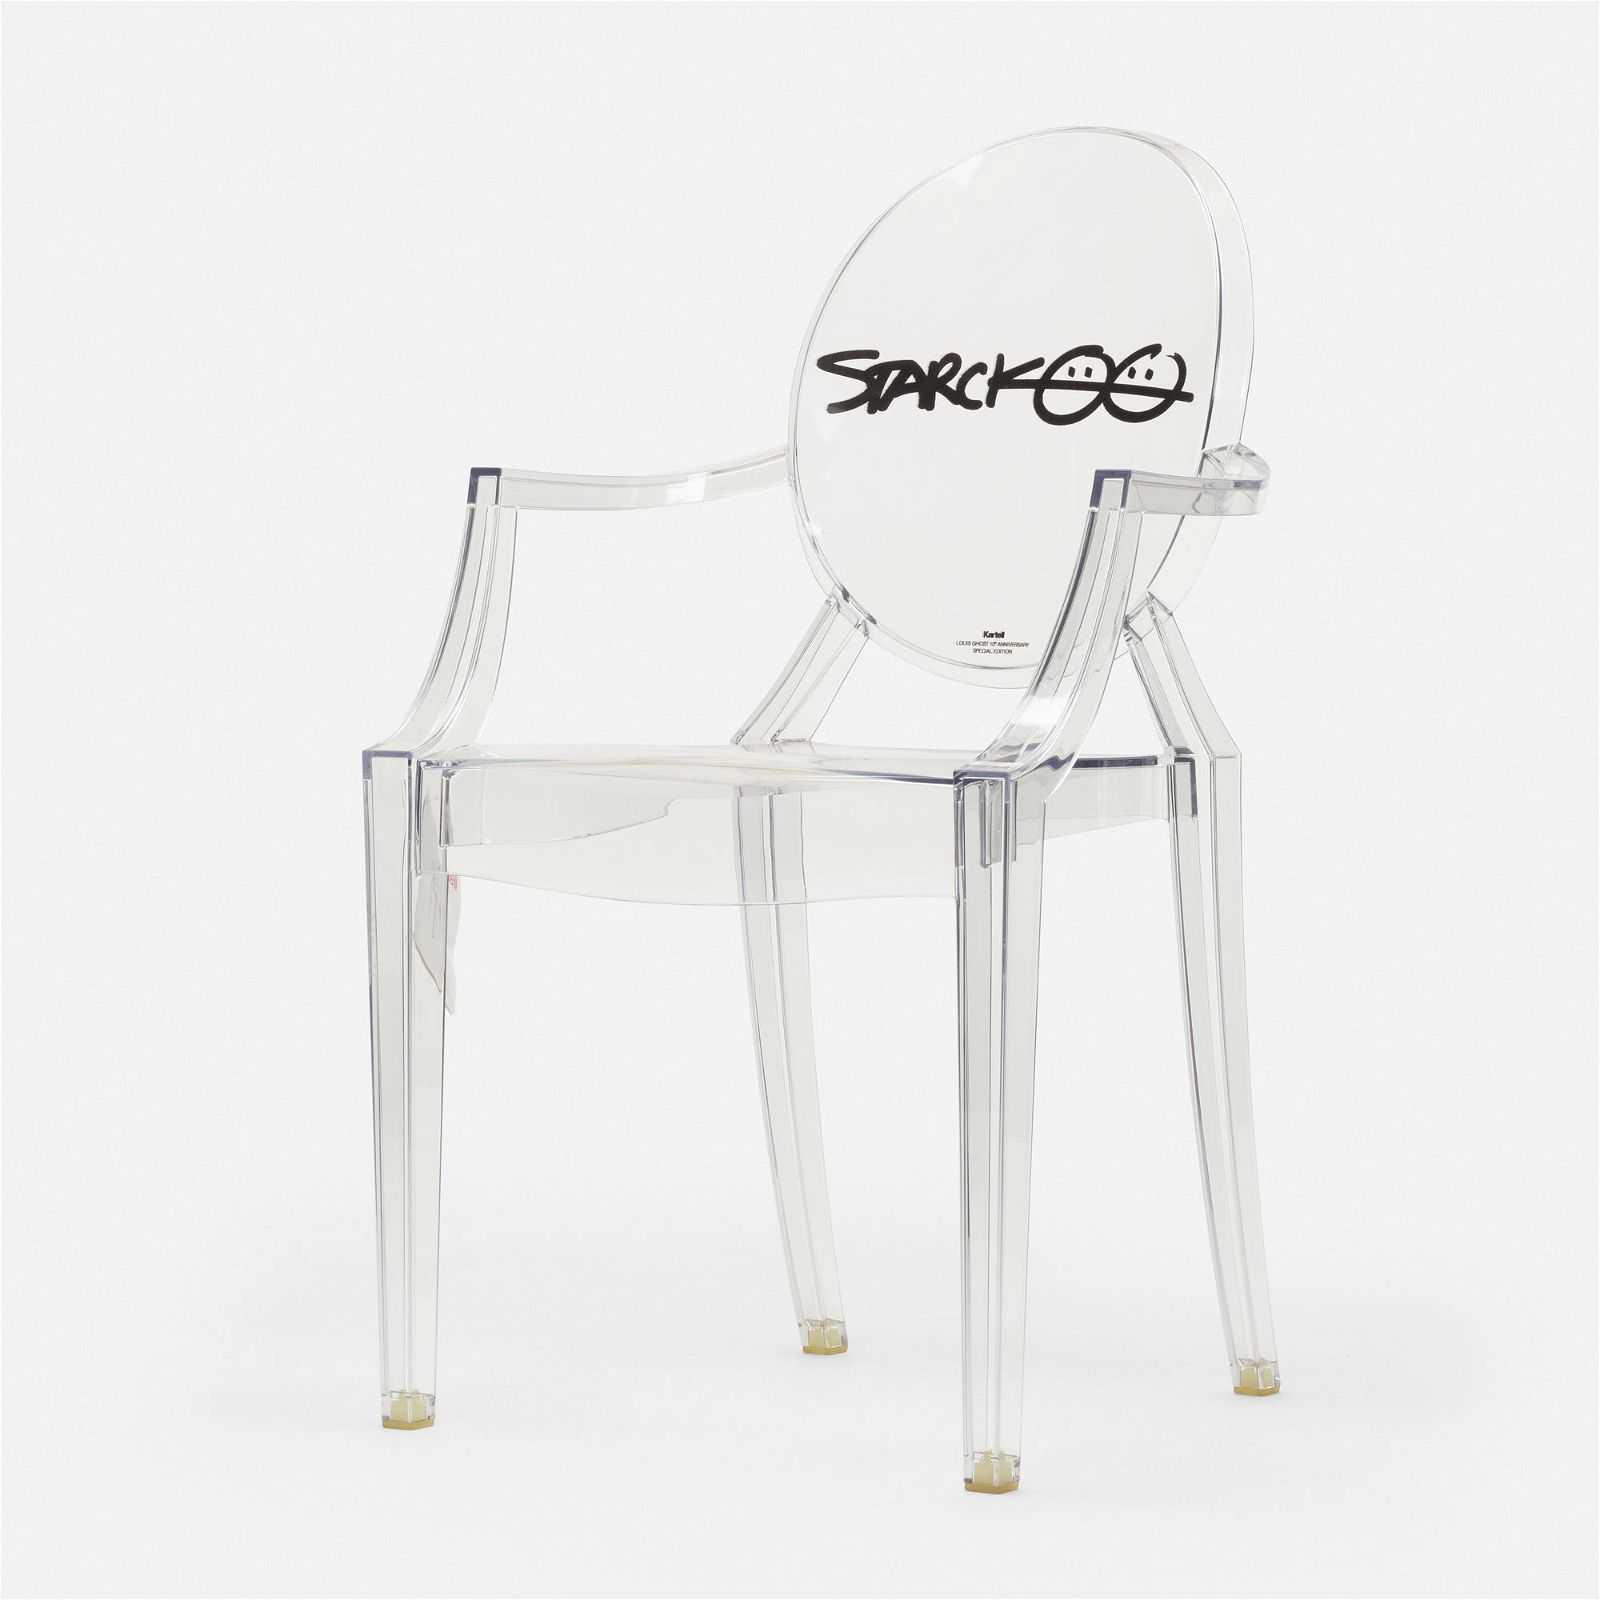 One of Philippe Starck’s most famous designs is his Louis Ghost chair in transparent acrylic. A limited edition 10th anniversary chair produced in 2012 for Kartell secured $1,100 plus the buyer’s premium in August 2022. Image courtesy of Wright and LiveAuctioneers.